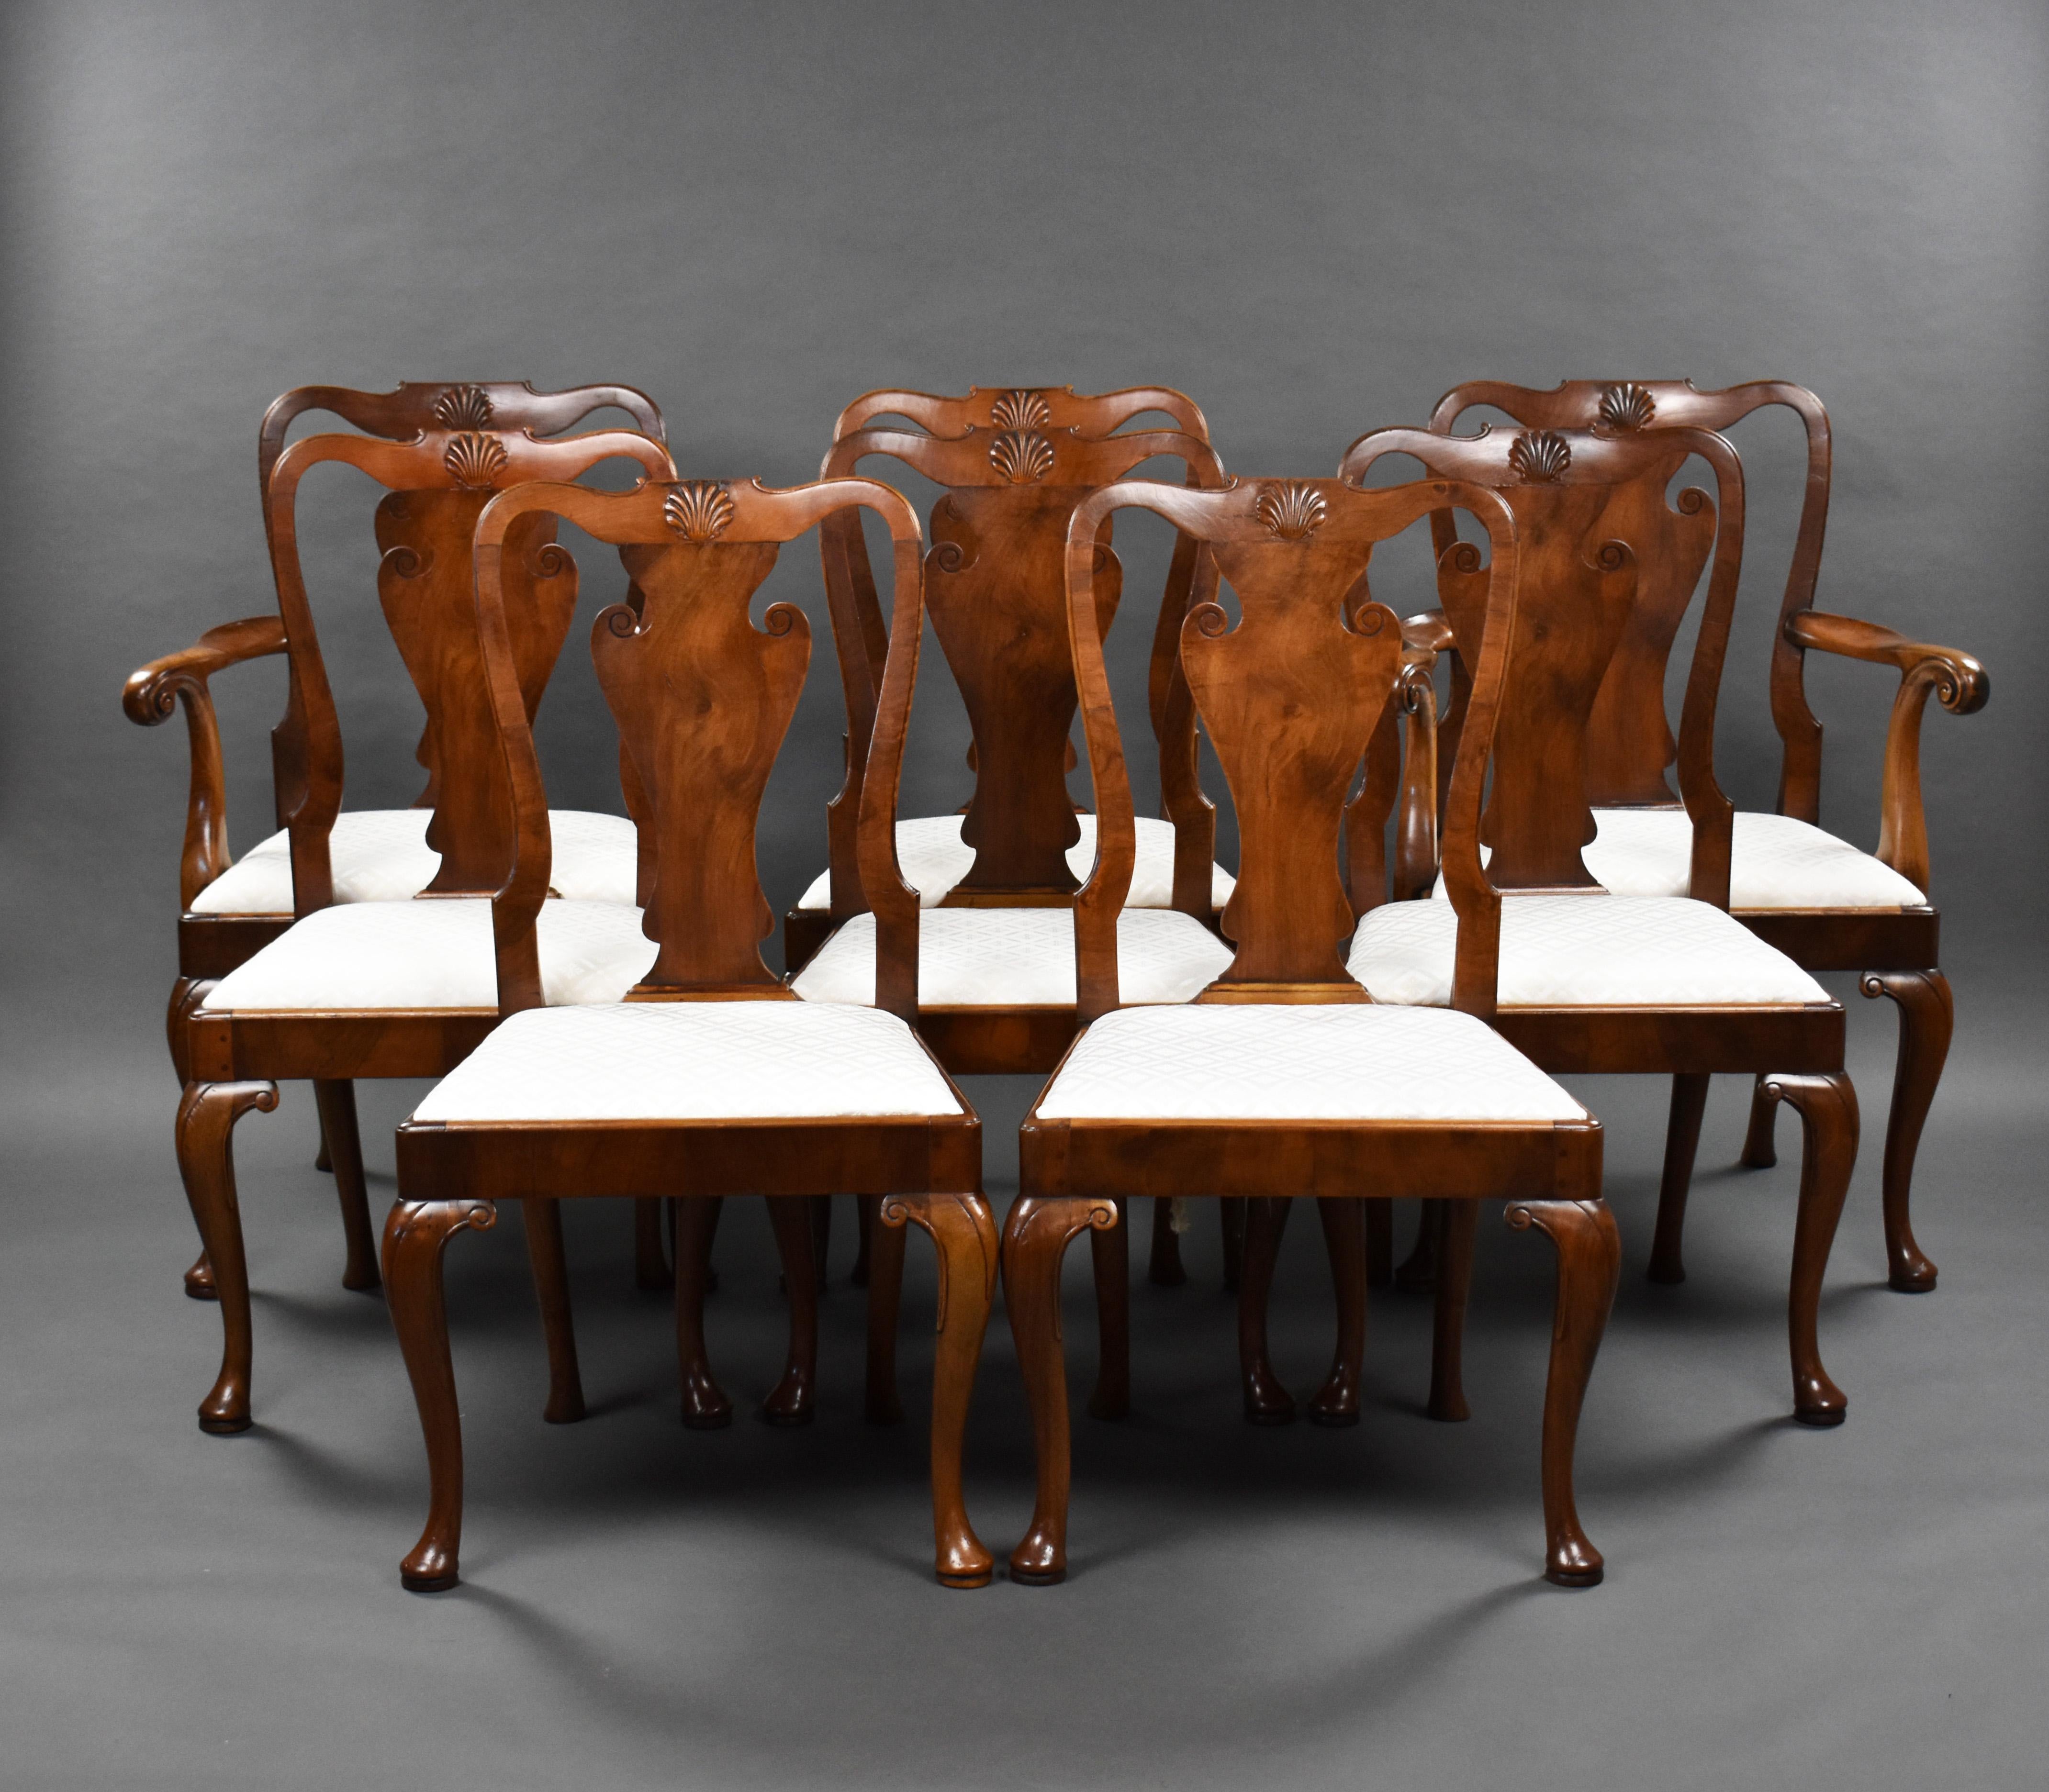 20th Century English Antique Walnut Extending Dining Table & 8 Chairs 2